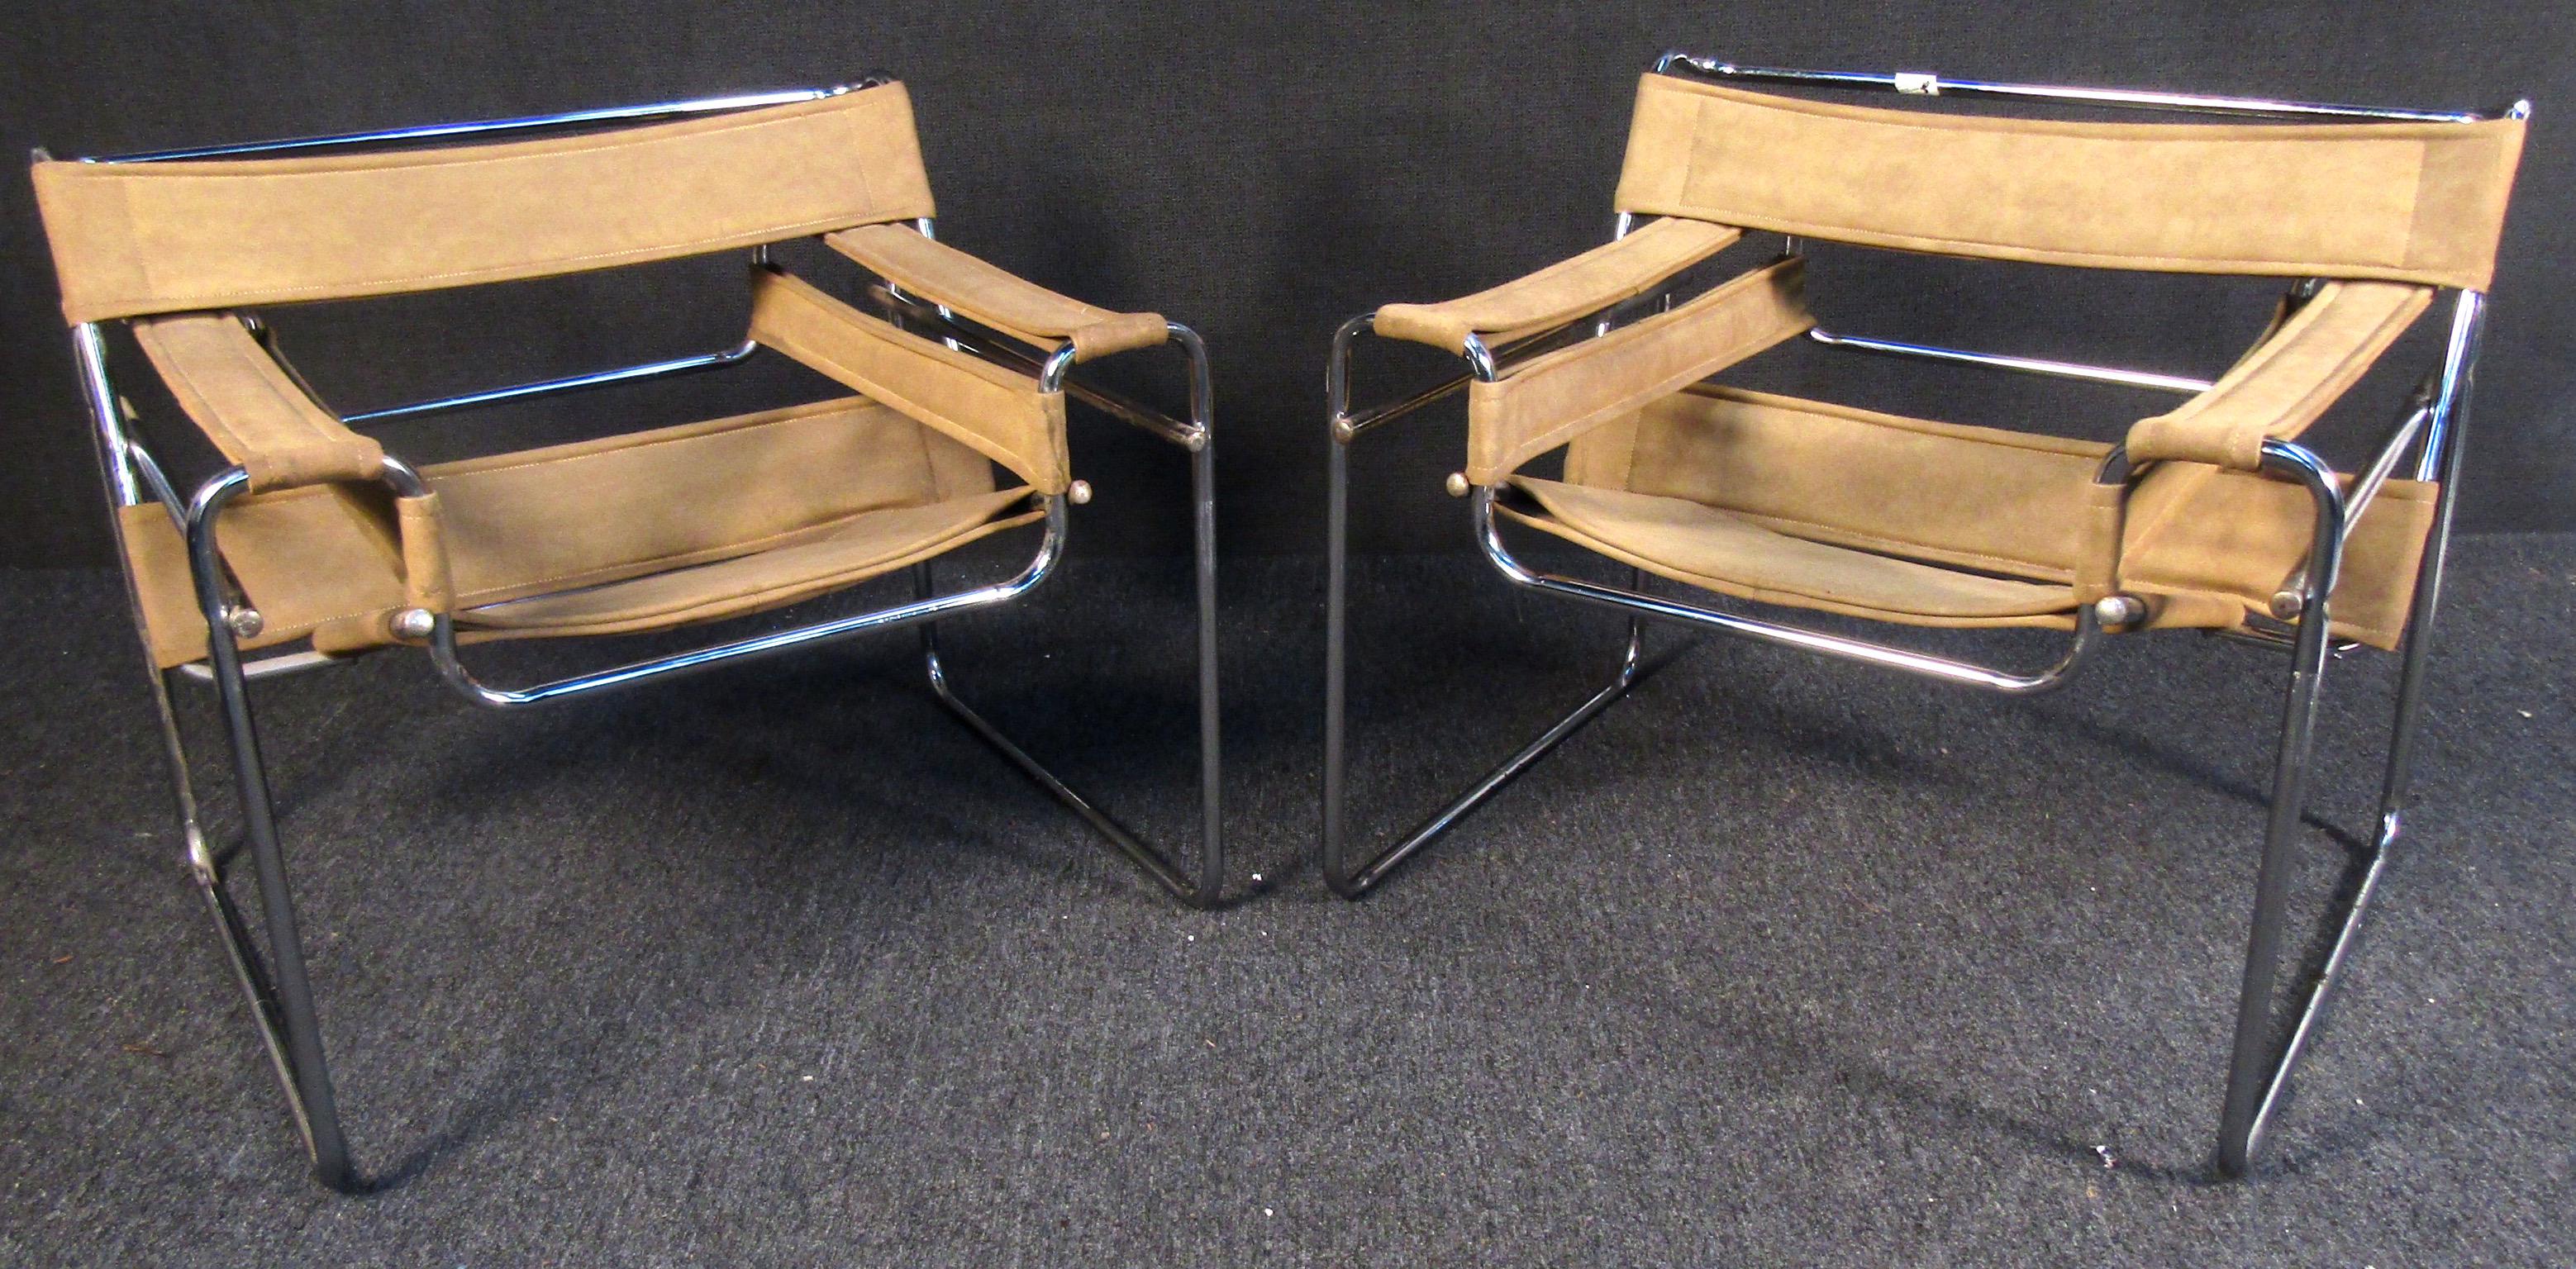 Wassily style chrome frame armchairs with iconic tan straps for the seats, backs and arms. 

(Please confirm item location - NY or NJ - with dealer).